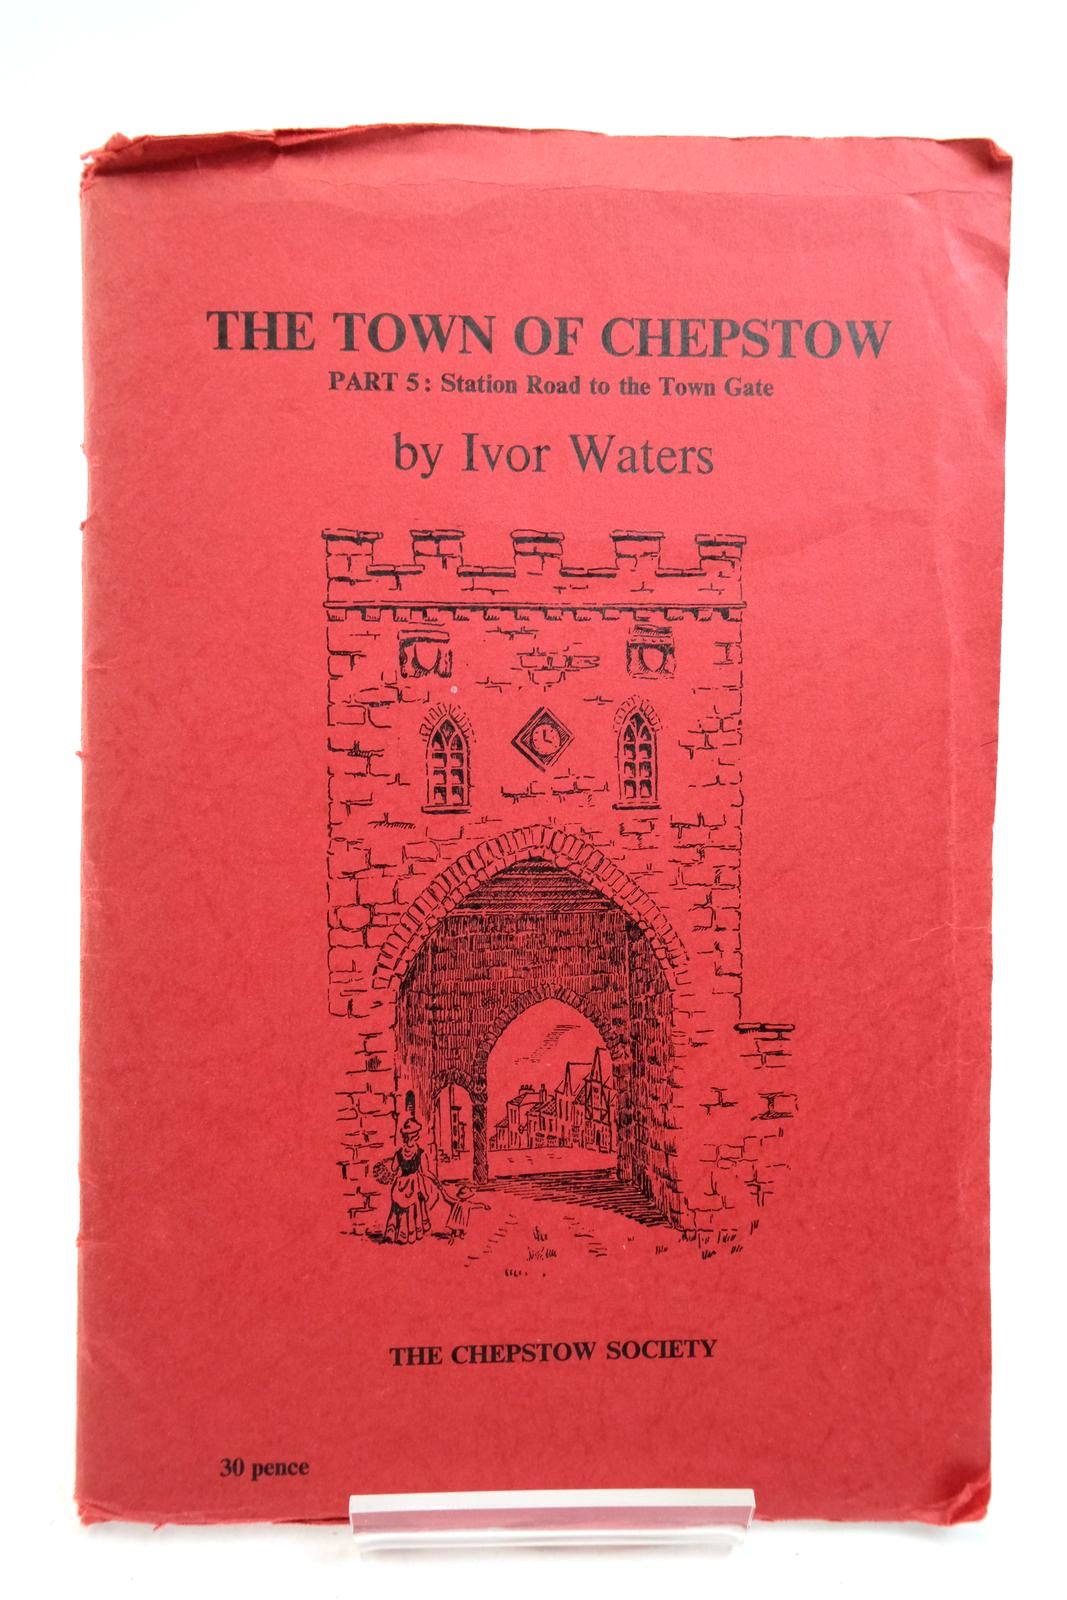 Photo of THE TOWN OF CHEPSTOW PART 5 written by Waters, Ivor illustrated by Waters, Mercedes published by The Chepstow Society (STOCK CODE: 2140418)  for sale by Stella & Rose's Books